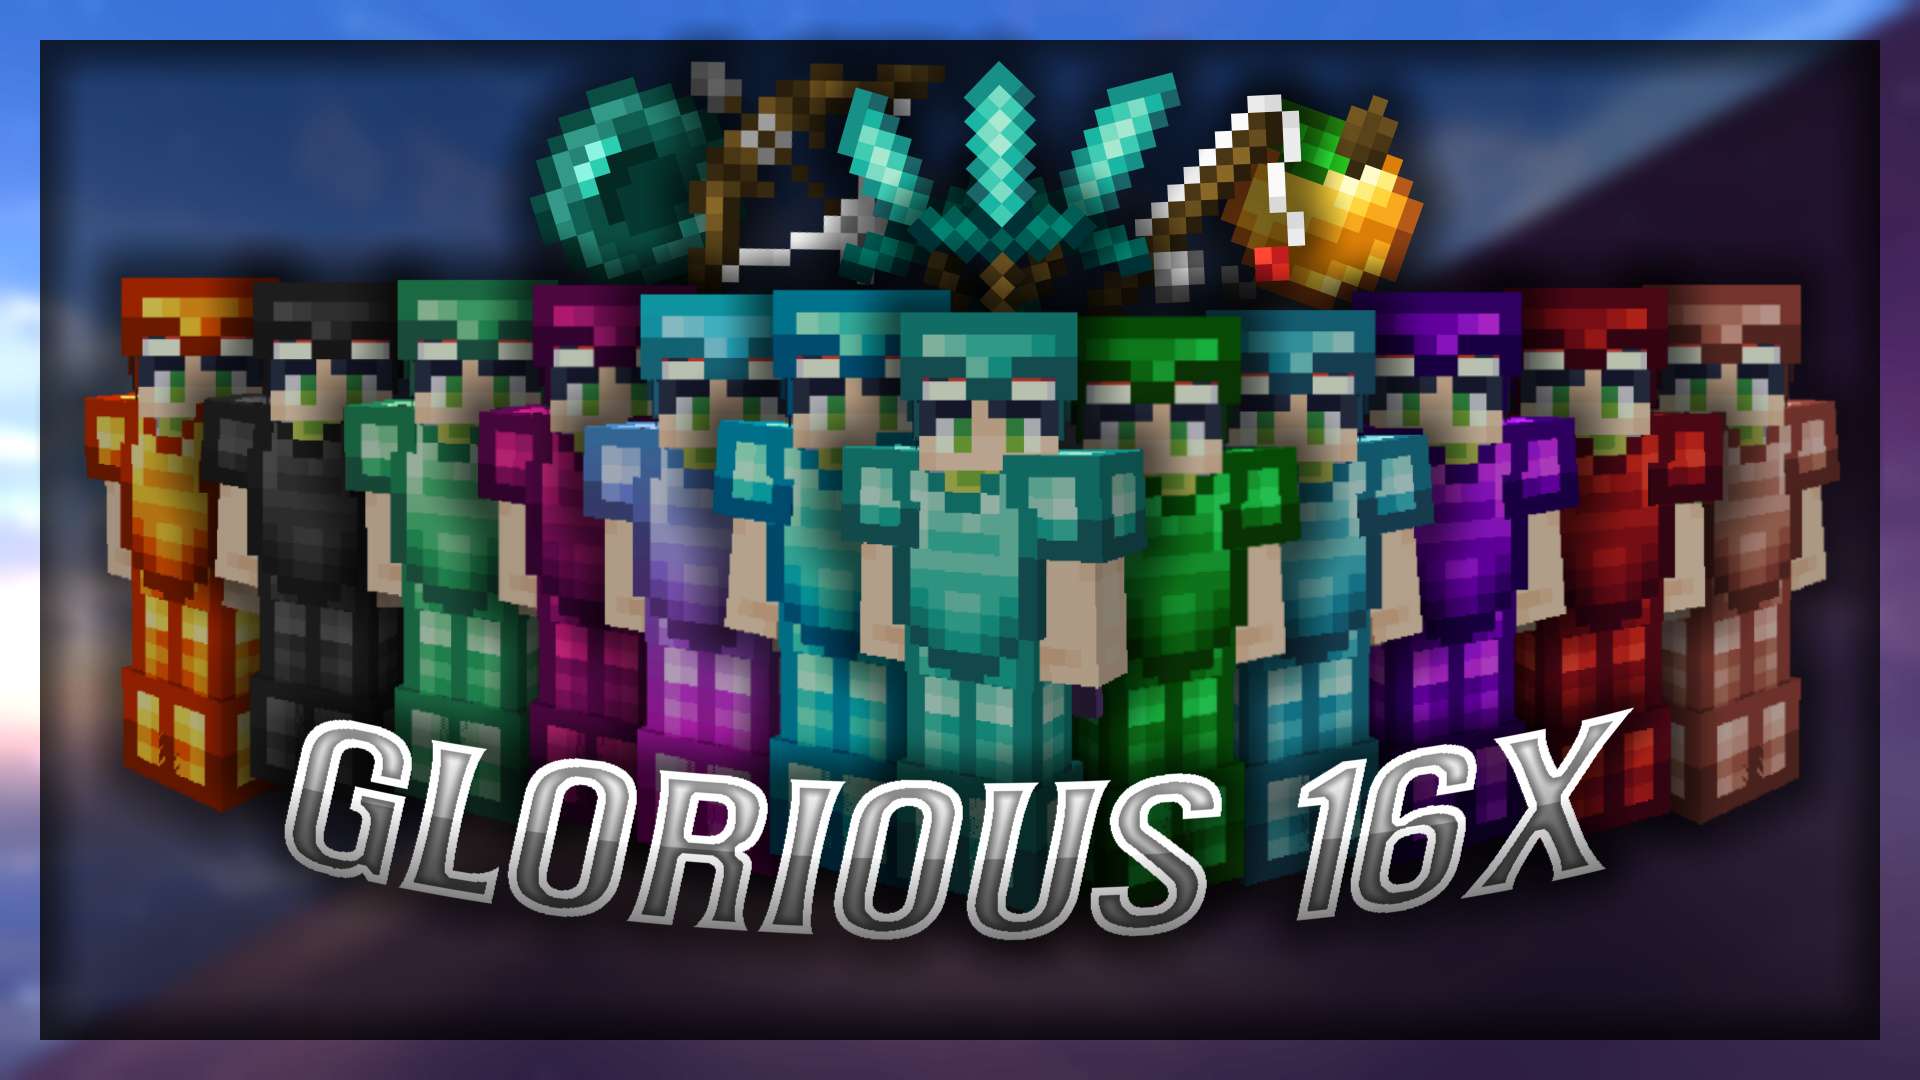 (open zip with WinRAR) Glorious - Ice 16x by Mek on PvPRP